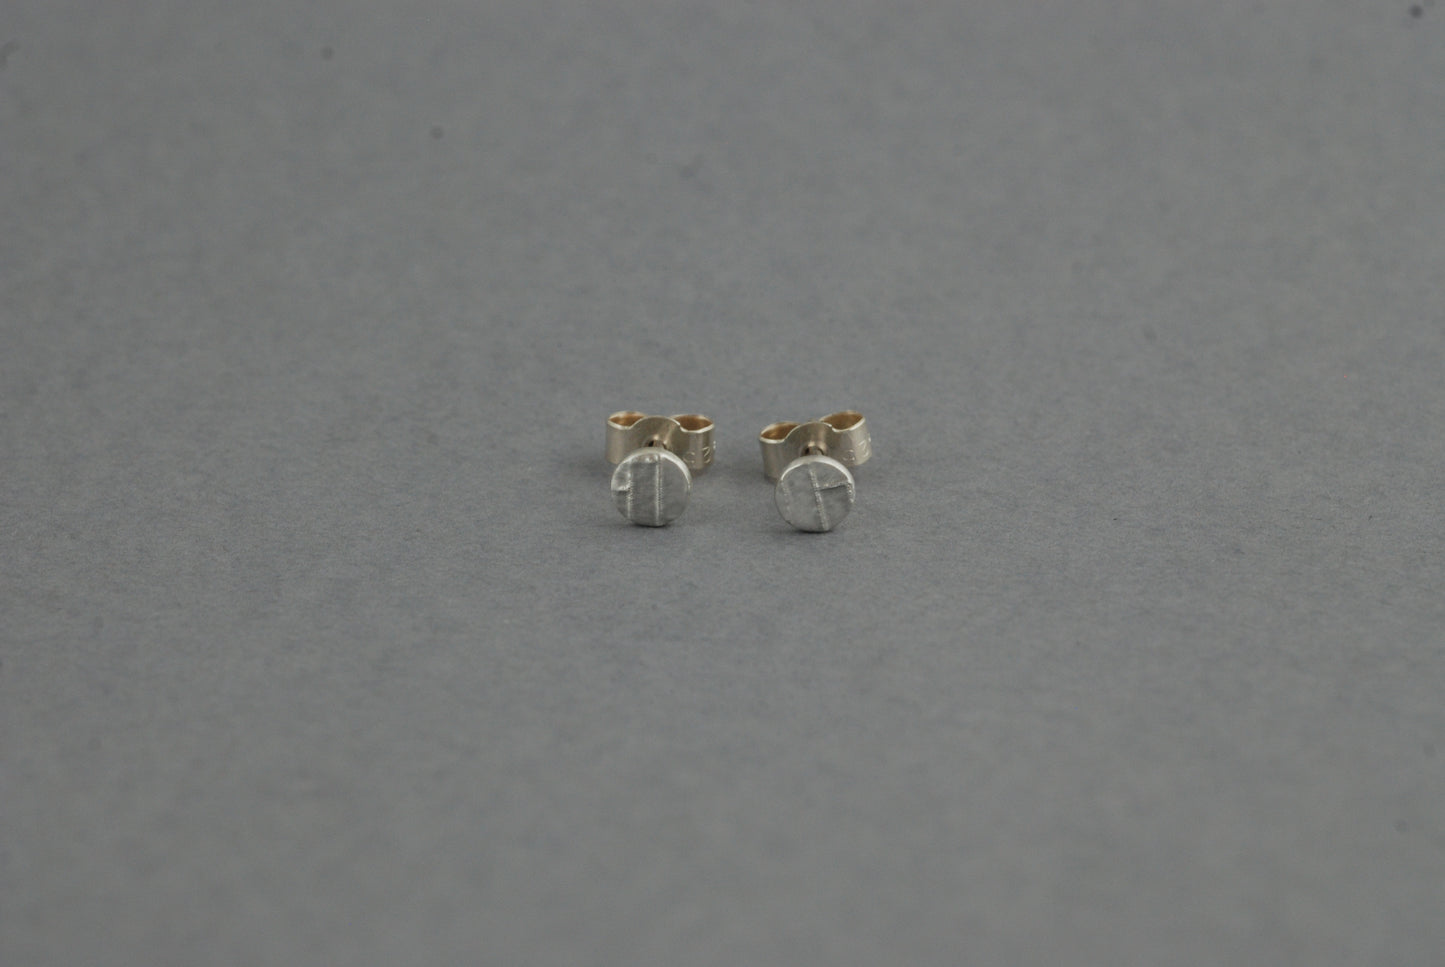 Tiny Sterling Silver Stud Earrings with Woven Texture